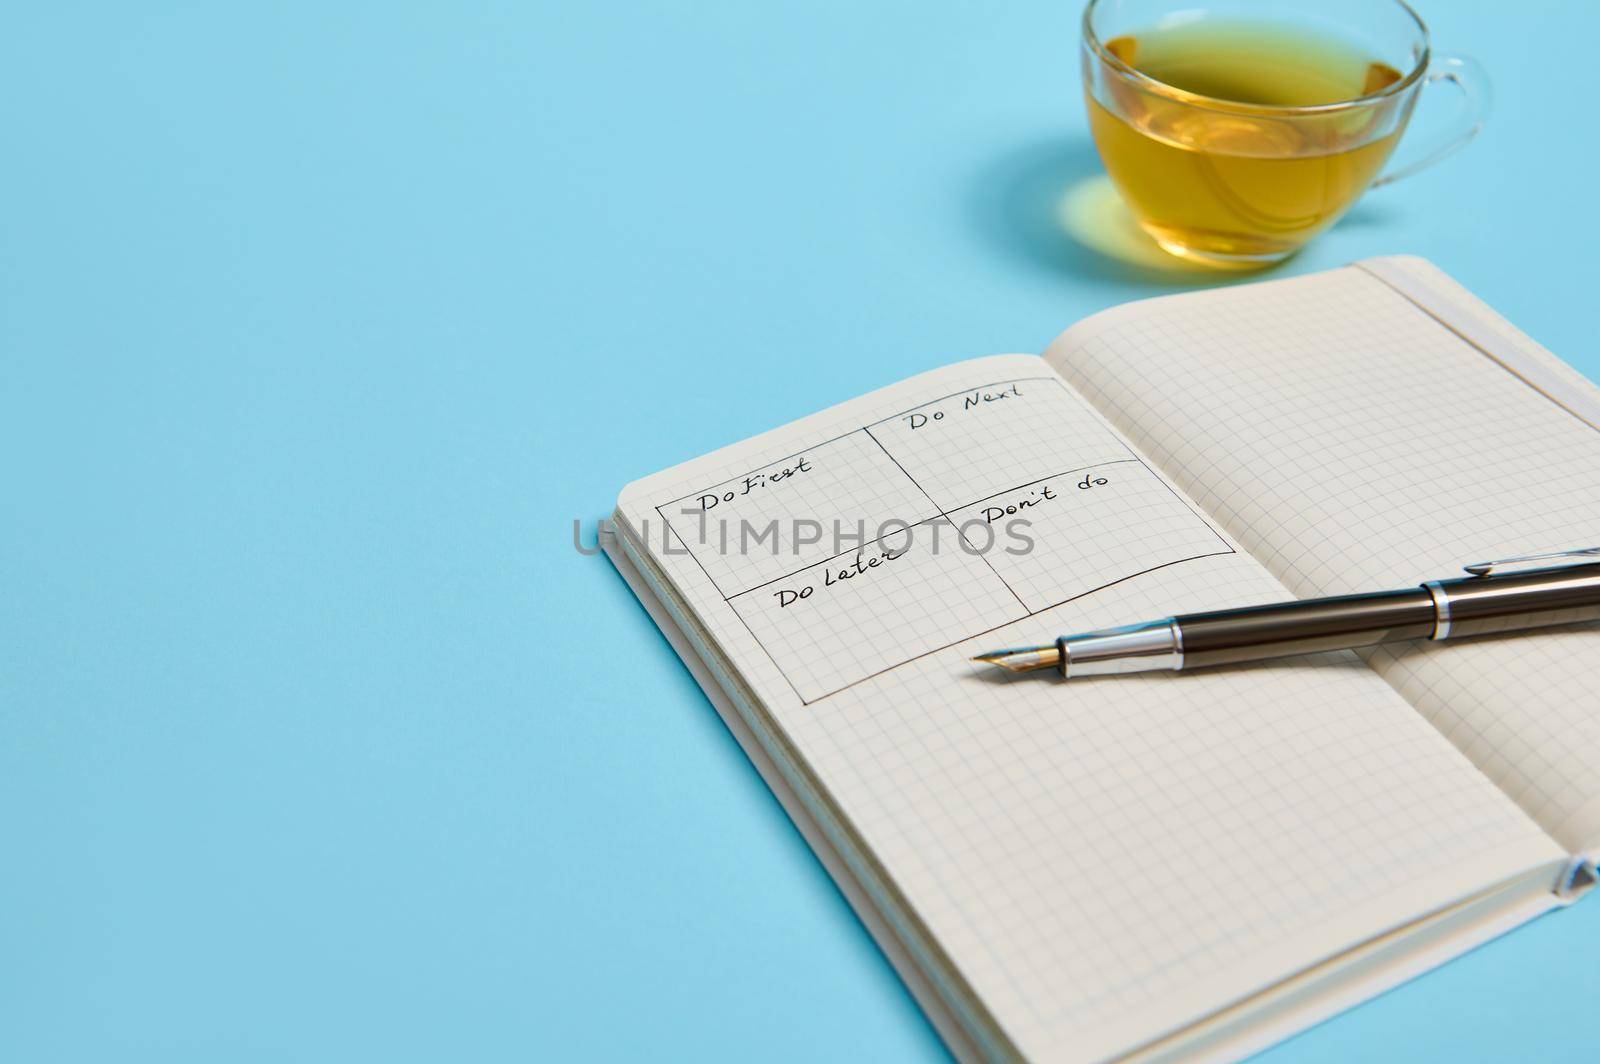 Time management, deadline concept: An open organizer notebook with timetable of the day by hour, ink pen, a tea cup on color background, copy space. Cropped image by artgf